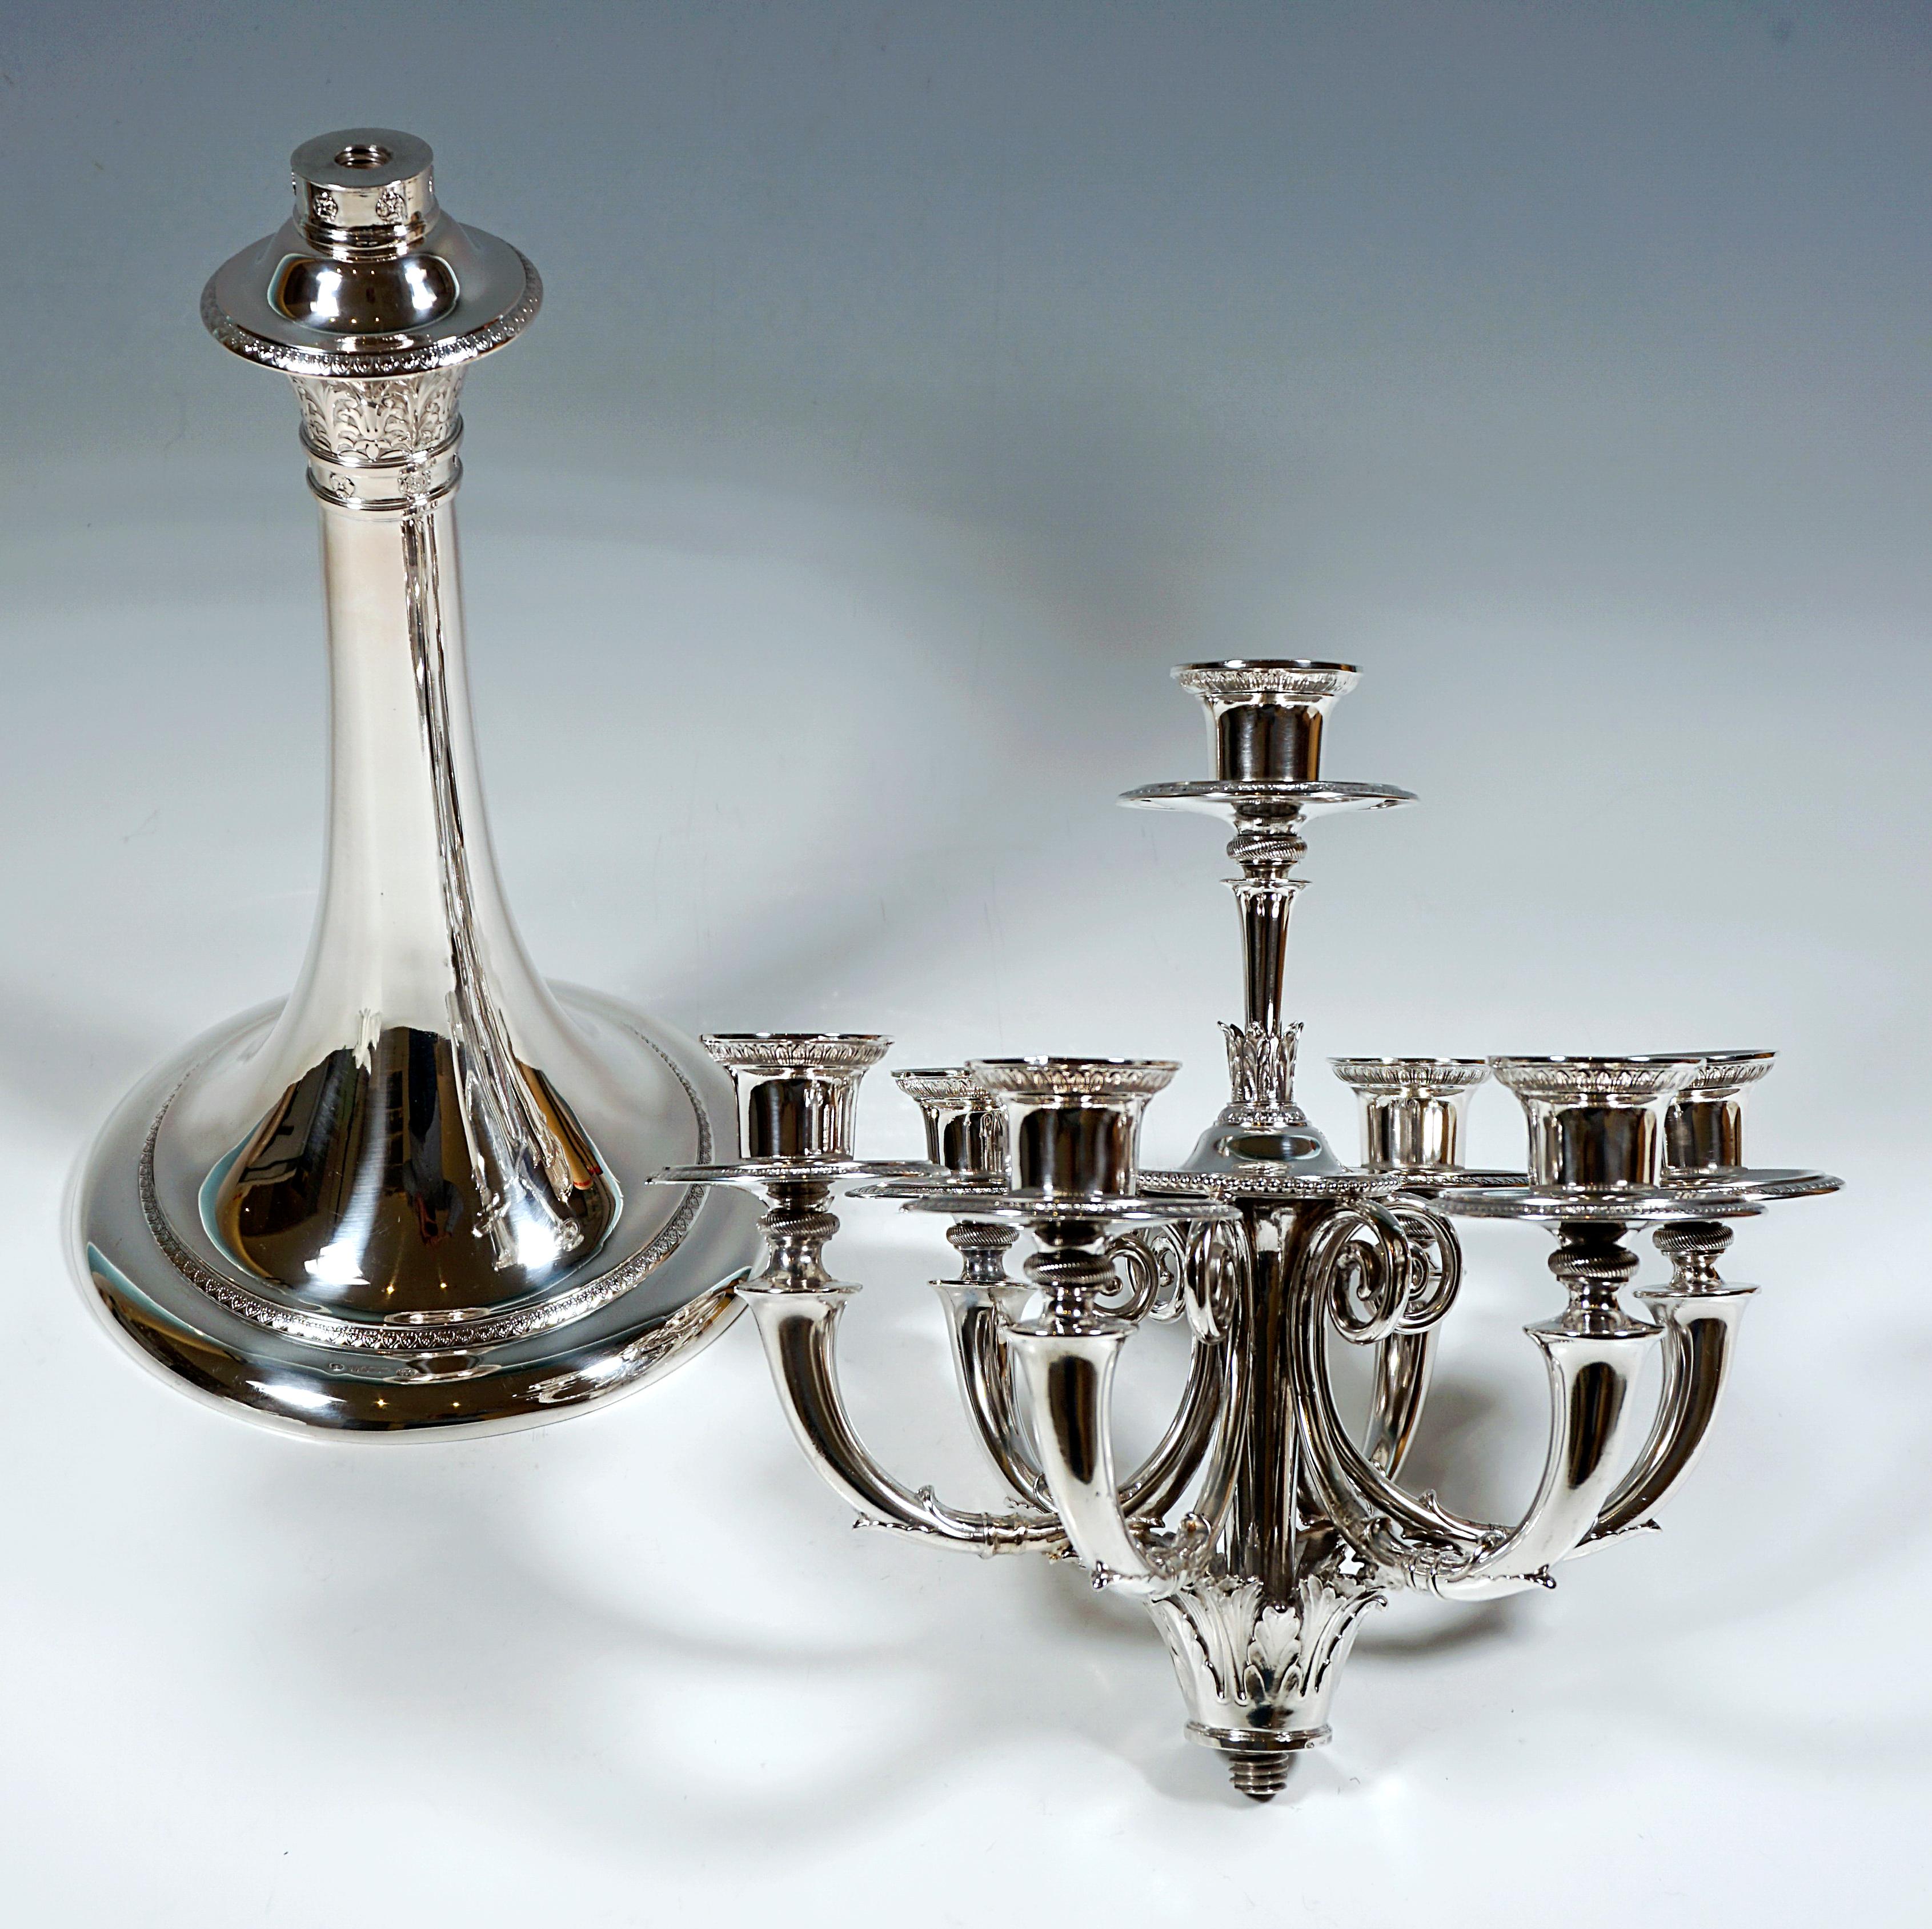 Early 20th Century Pair Of High 7-Flame Silver Candelabras, by J.C. Klinkosch Vienna, ca 1925 For Sale